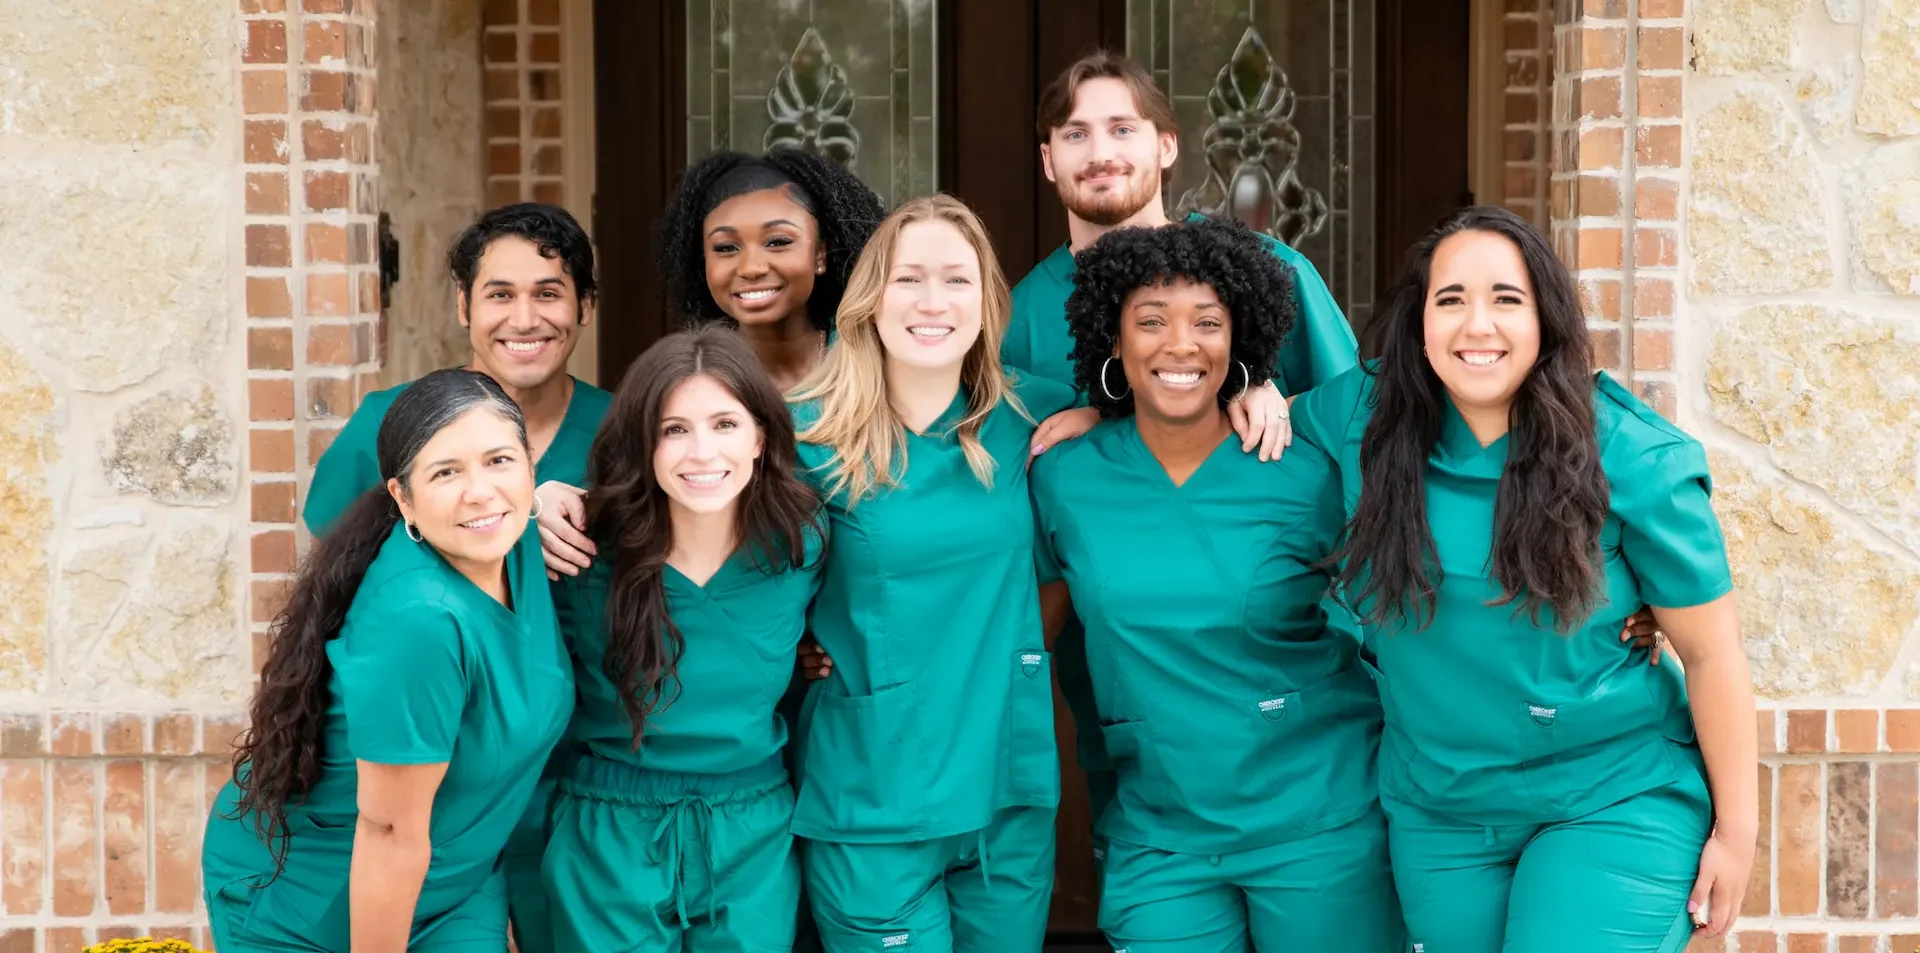 A group of smiling Avalon Memory Care staff members wearing green scrub uniforms.